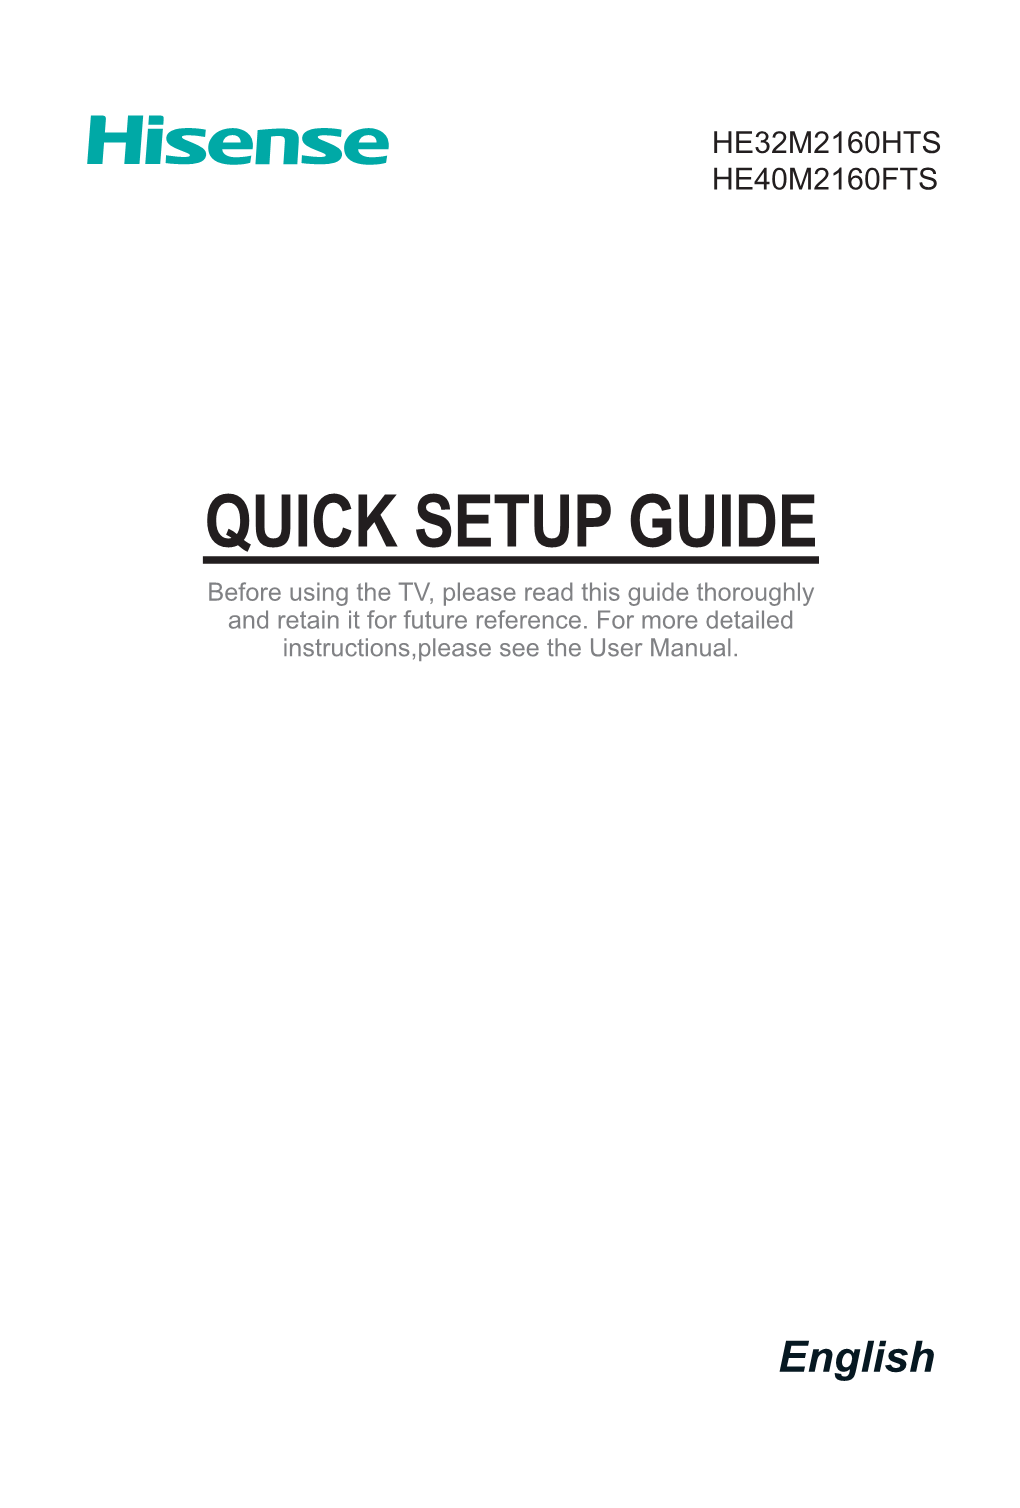 QUICK SETUP GUIDE Before Using the TV, Please Read This Guide Thoroughly and Retain It for Future Reference